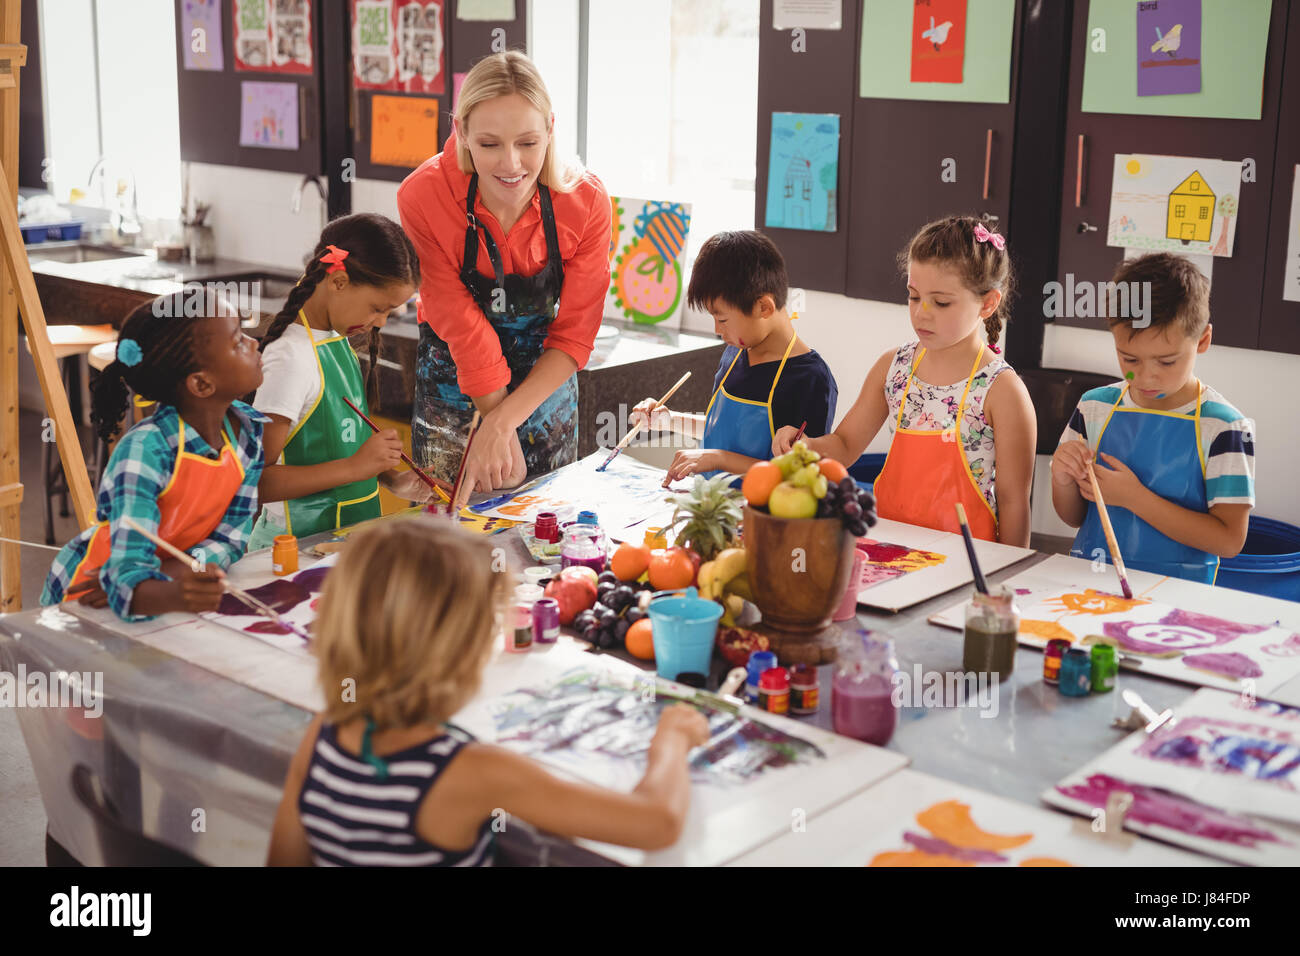 Teacher assisting schoolkids in drawing class at school Stock Photo